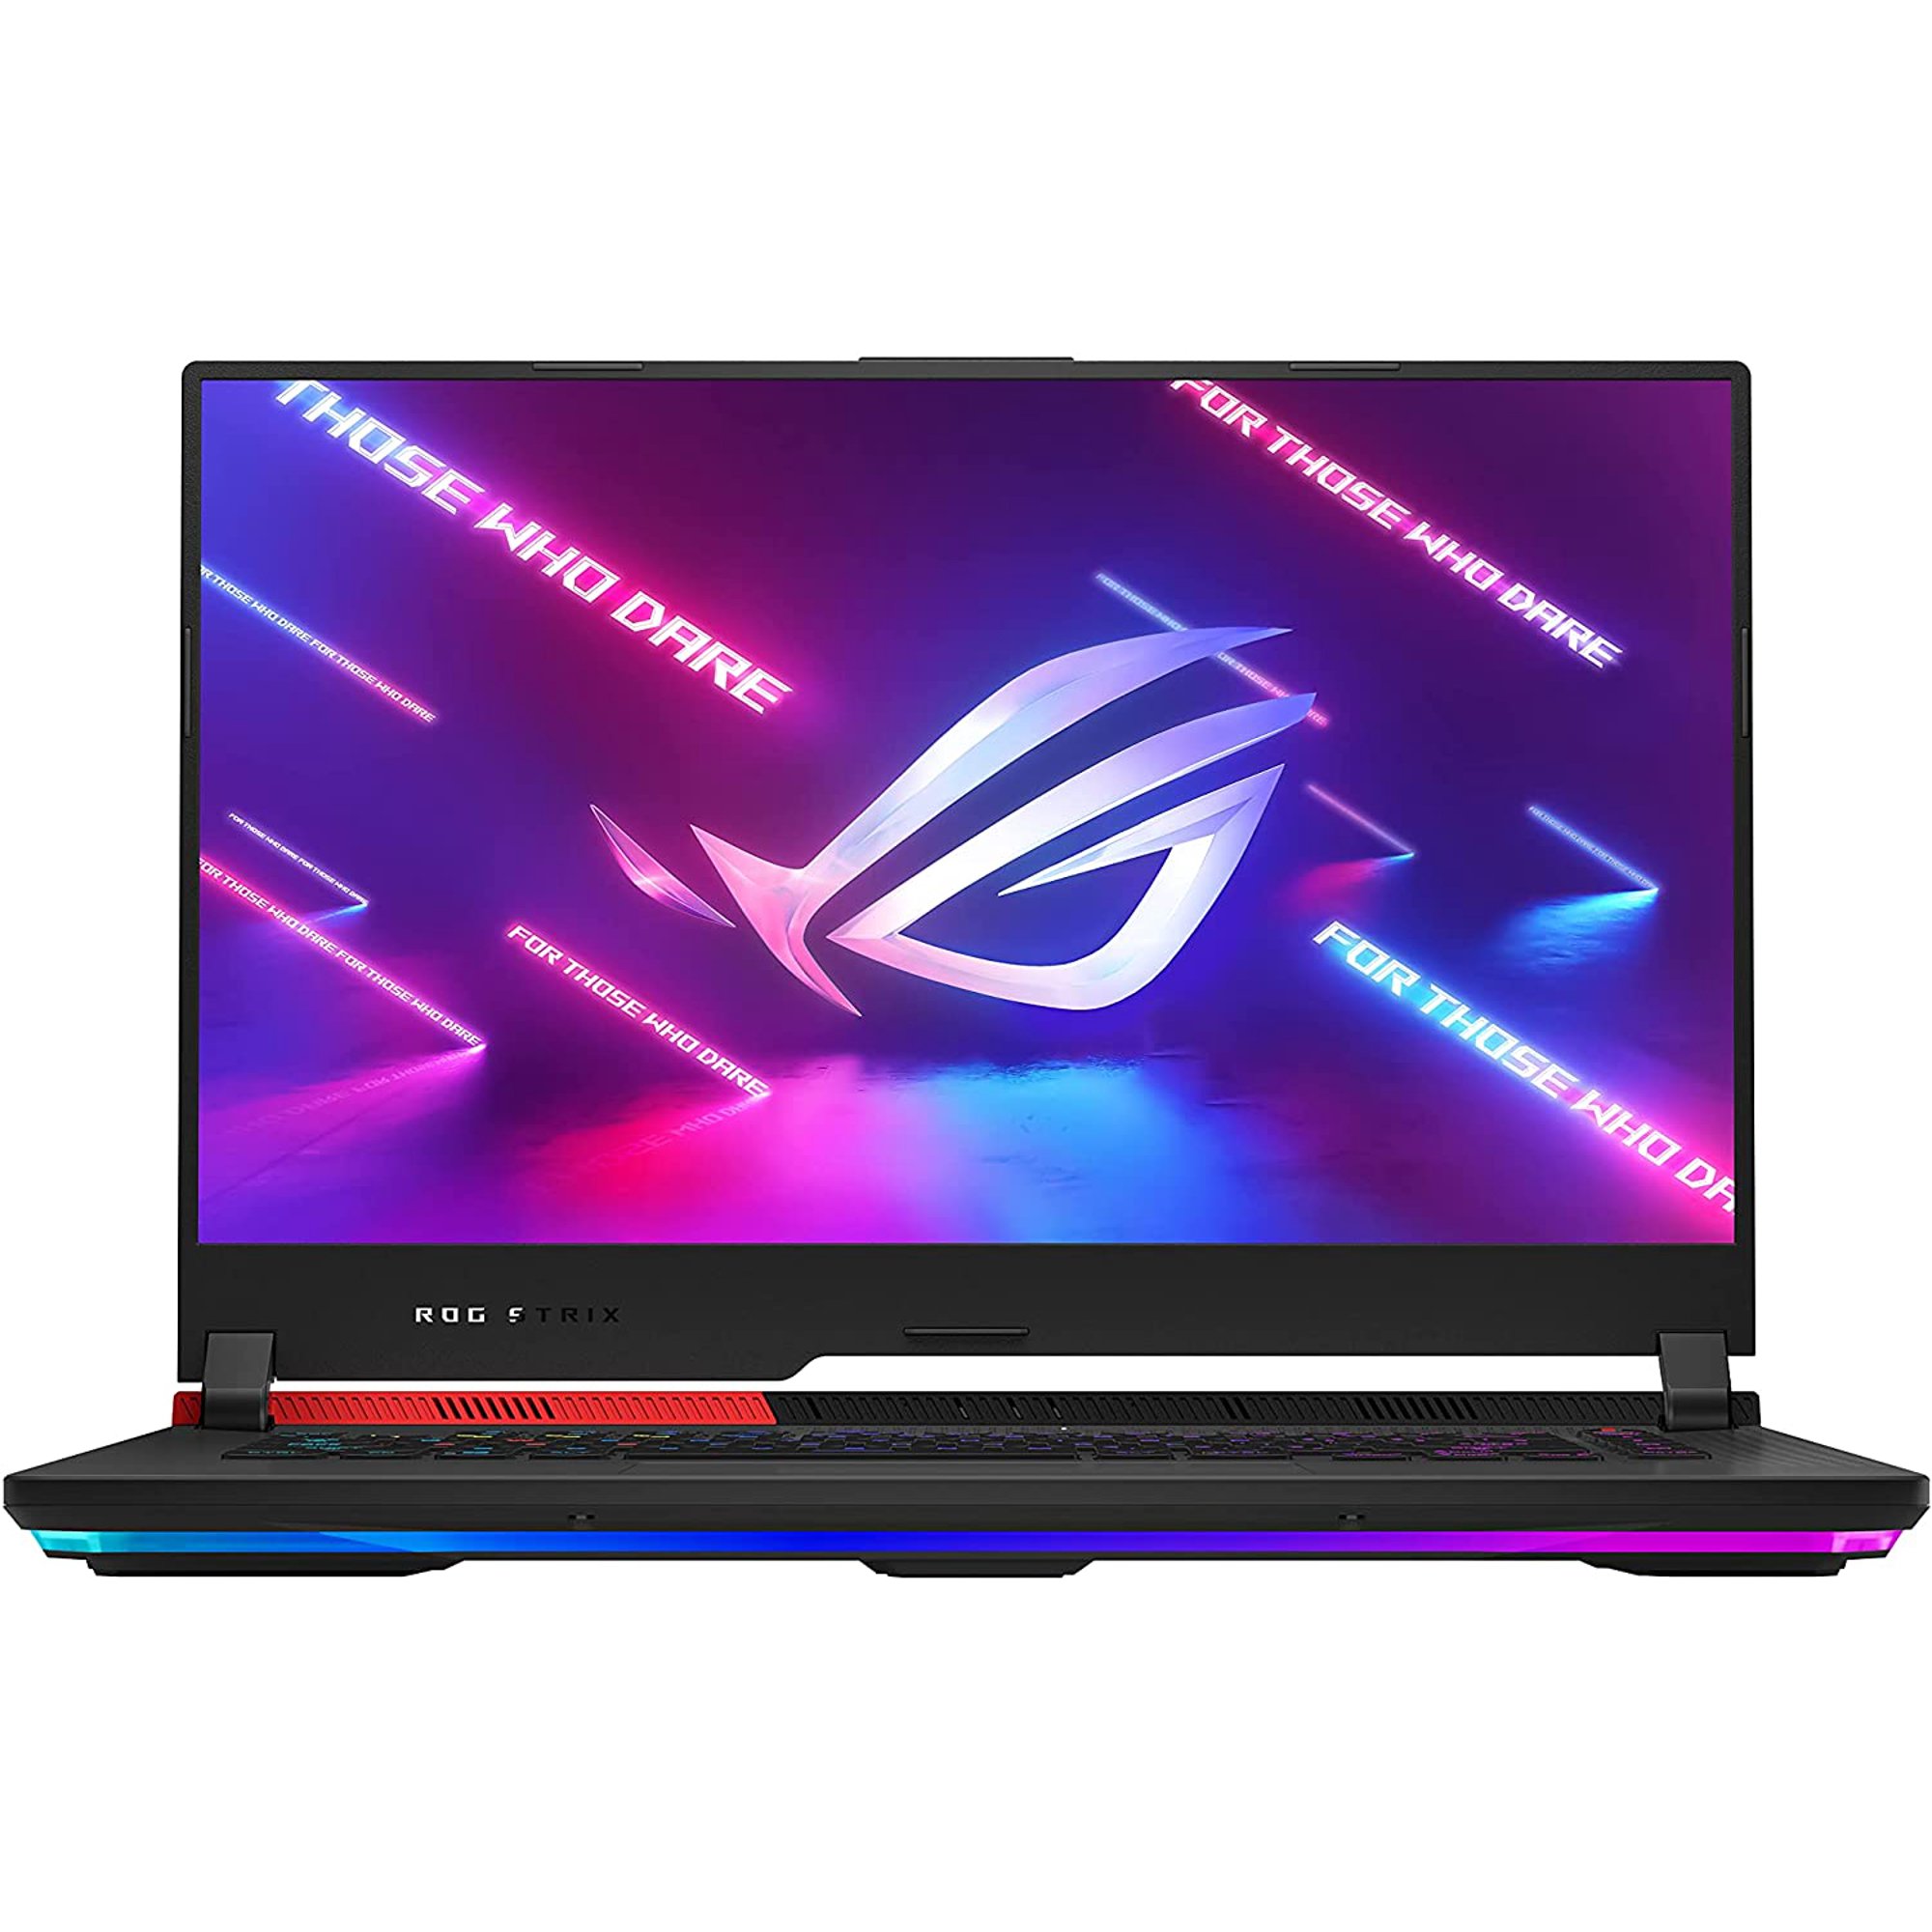 Asus Rog Strix G15 G513 156 Inches Laptop Full Specifications Offers